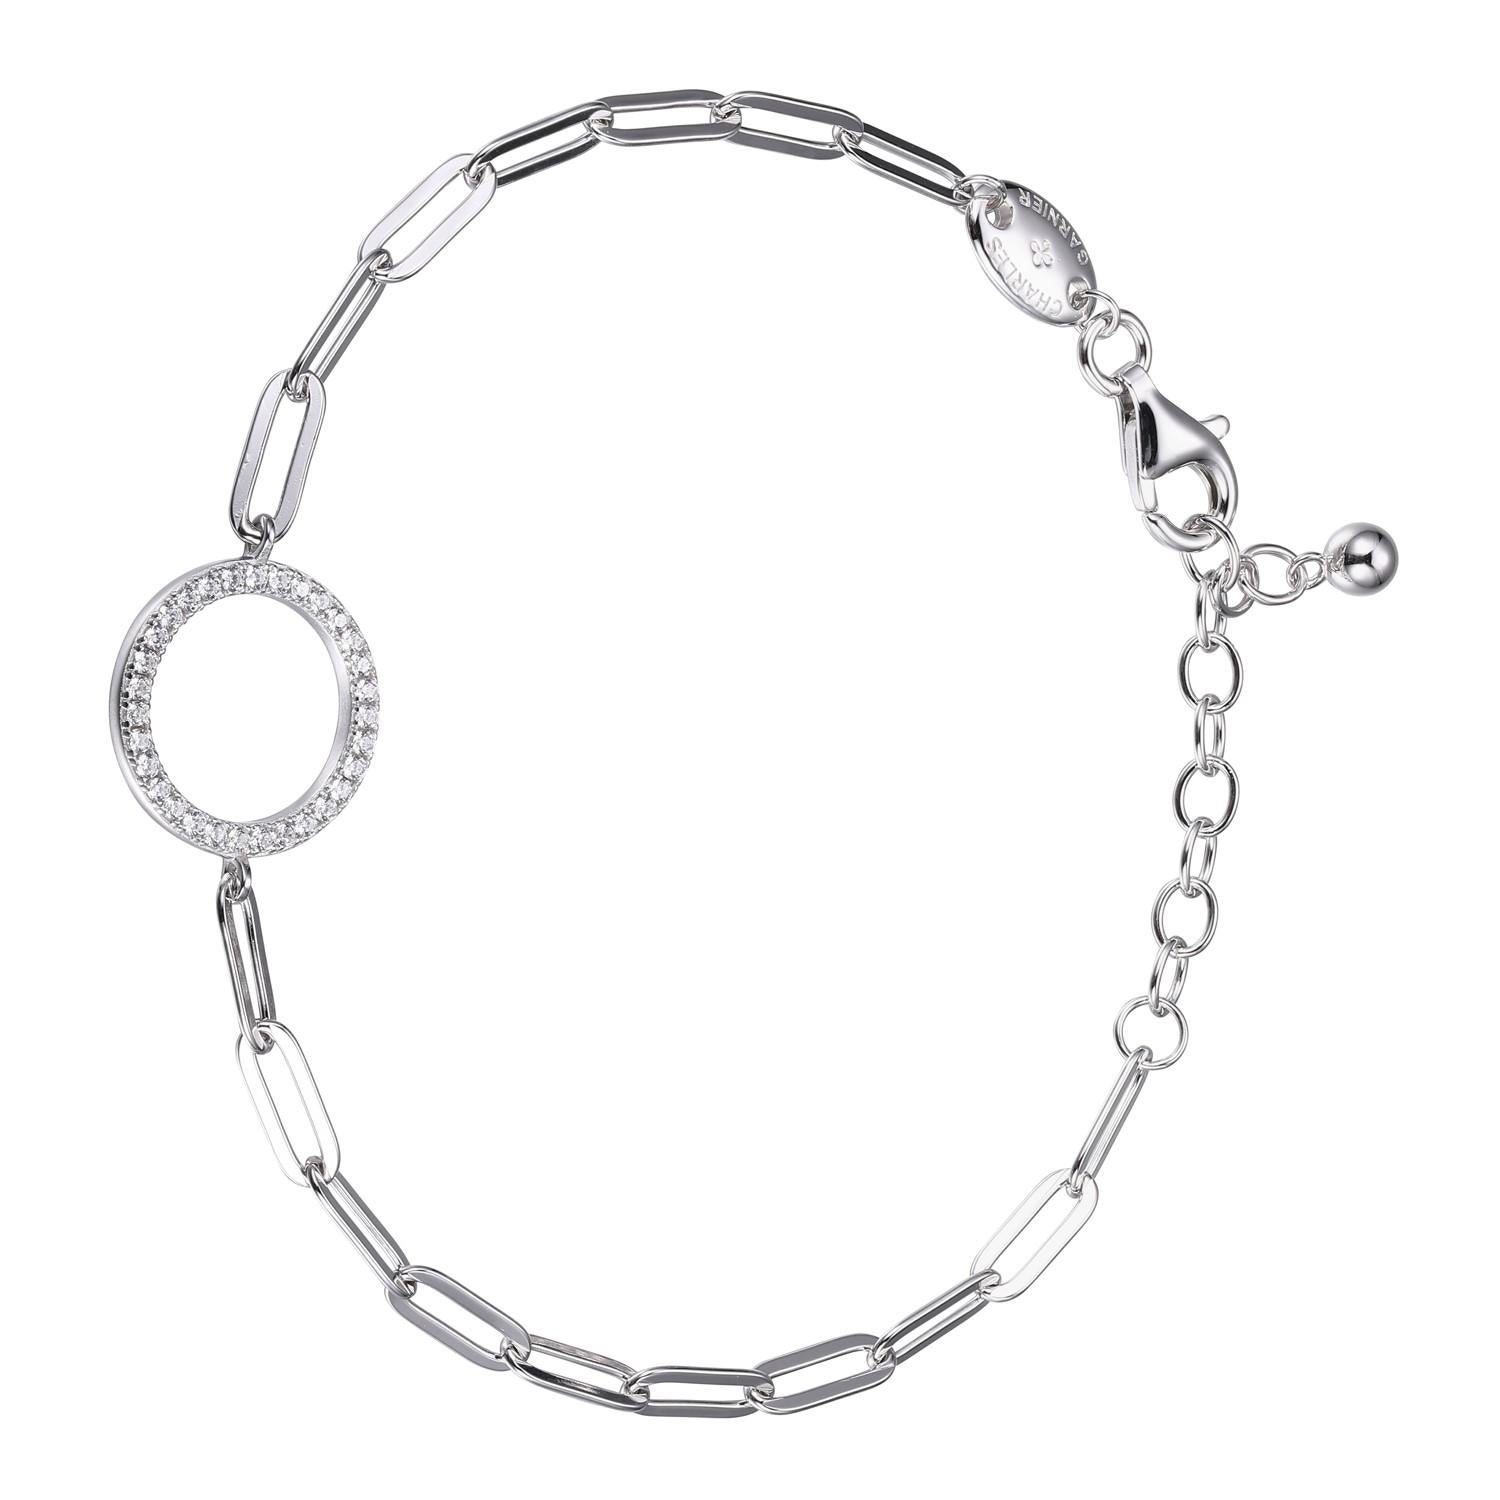 Sterling Silver Bracelet made with Paperclip Chain (3mm) and CZ Circle (15mm) in Center, Measures 6.75